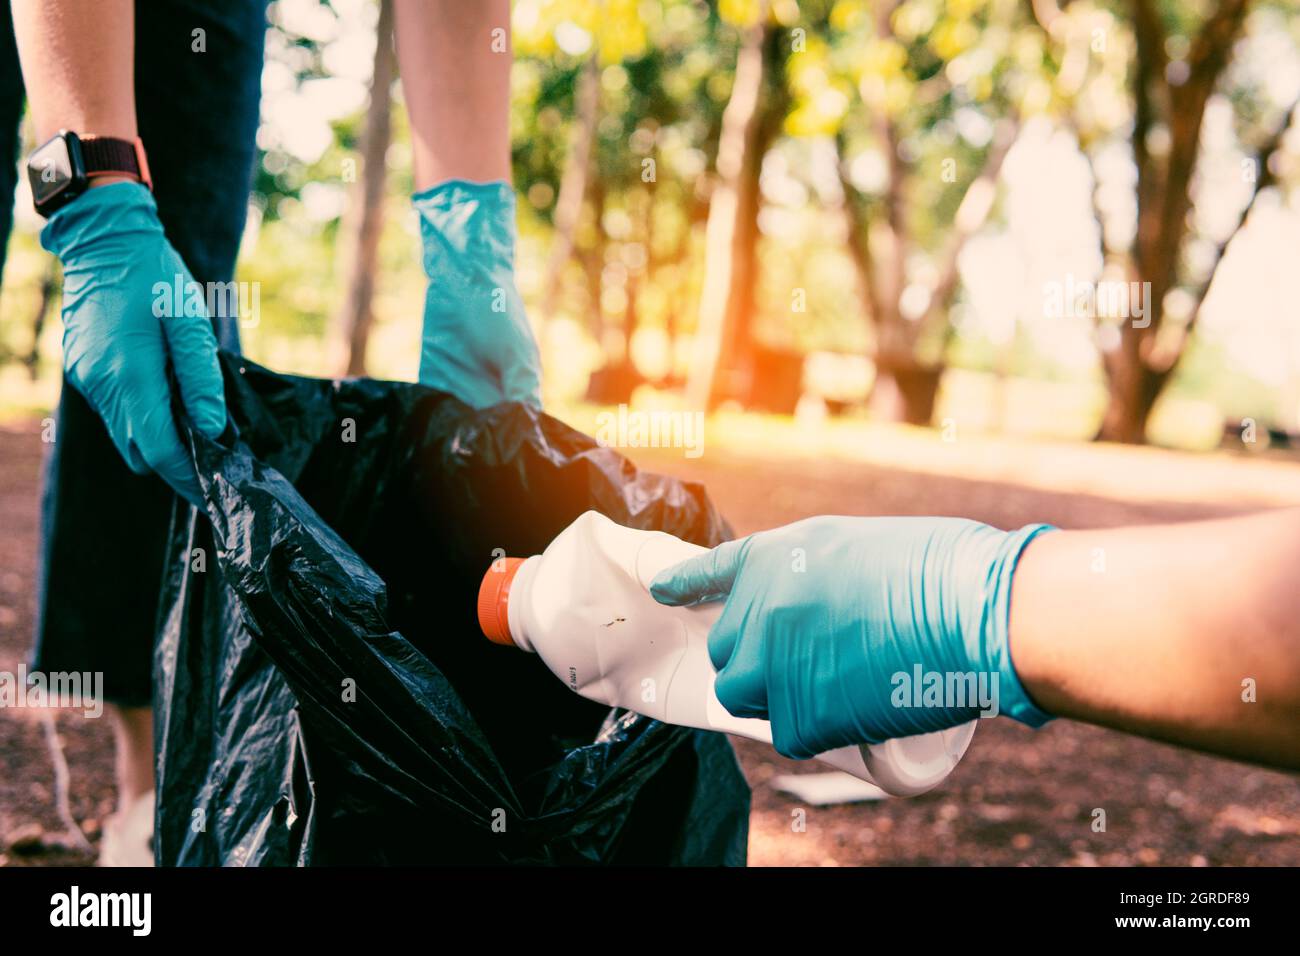 Volunteer Holding Plastic Garbage Clean To Dispose Of Waste Properly. Stock Photo